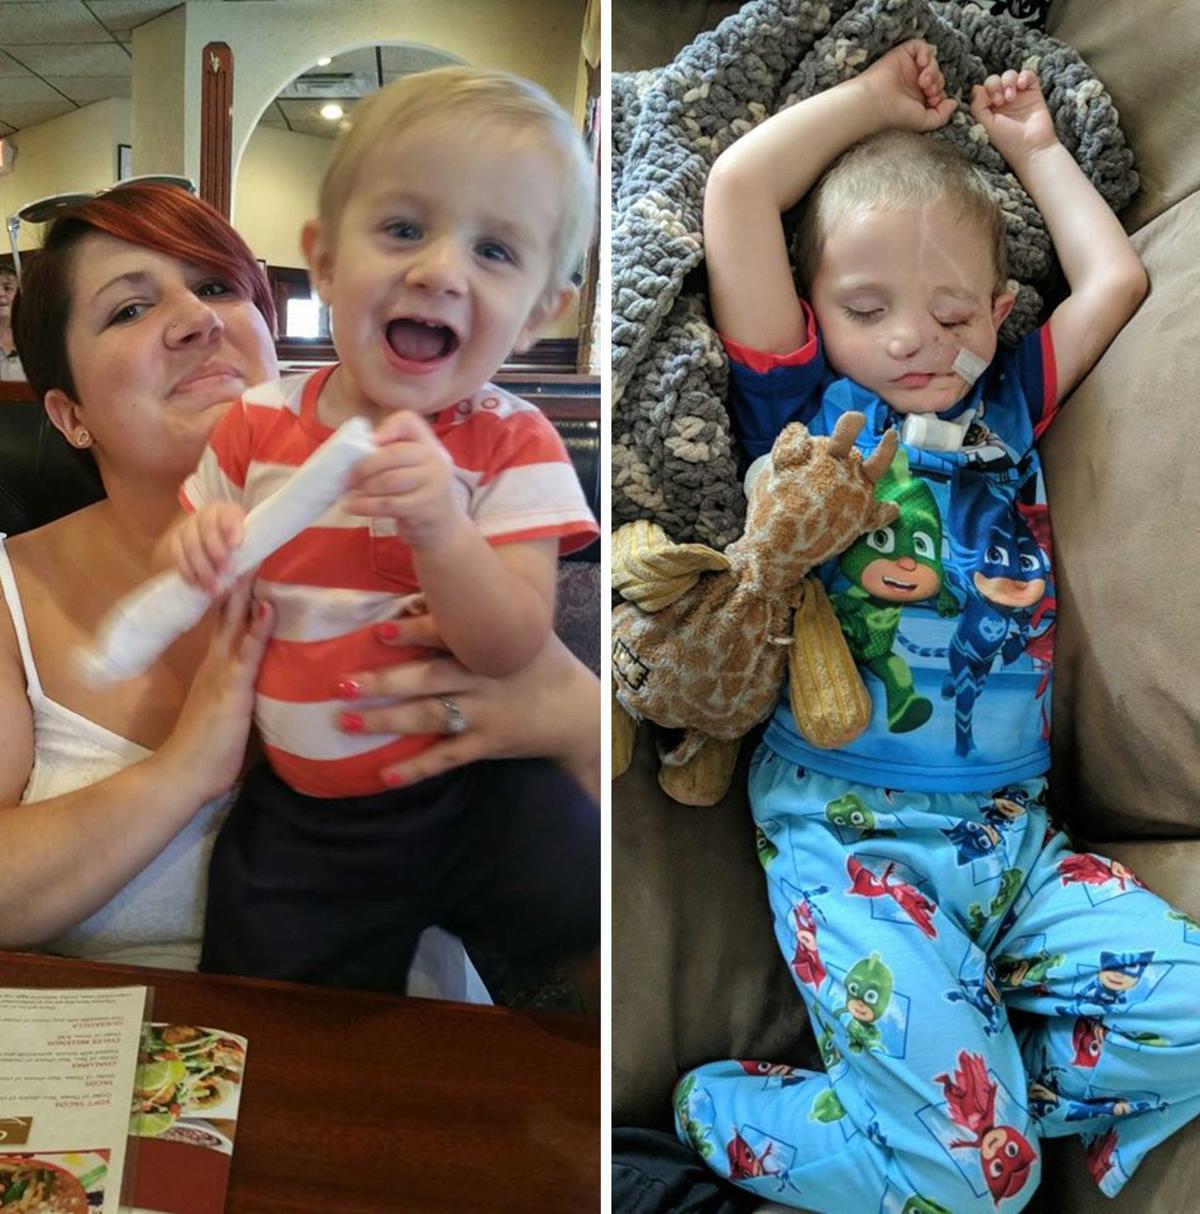 (L) Mother Brittany, 31, with Ryder before the attack; (R) Ryder Wells, 5, after the attack (Caters News)